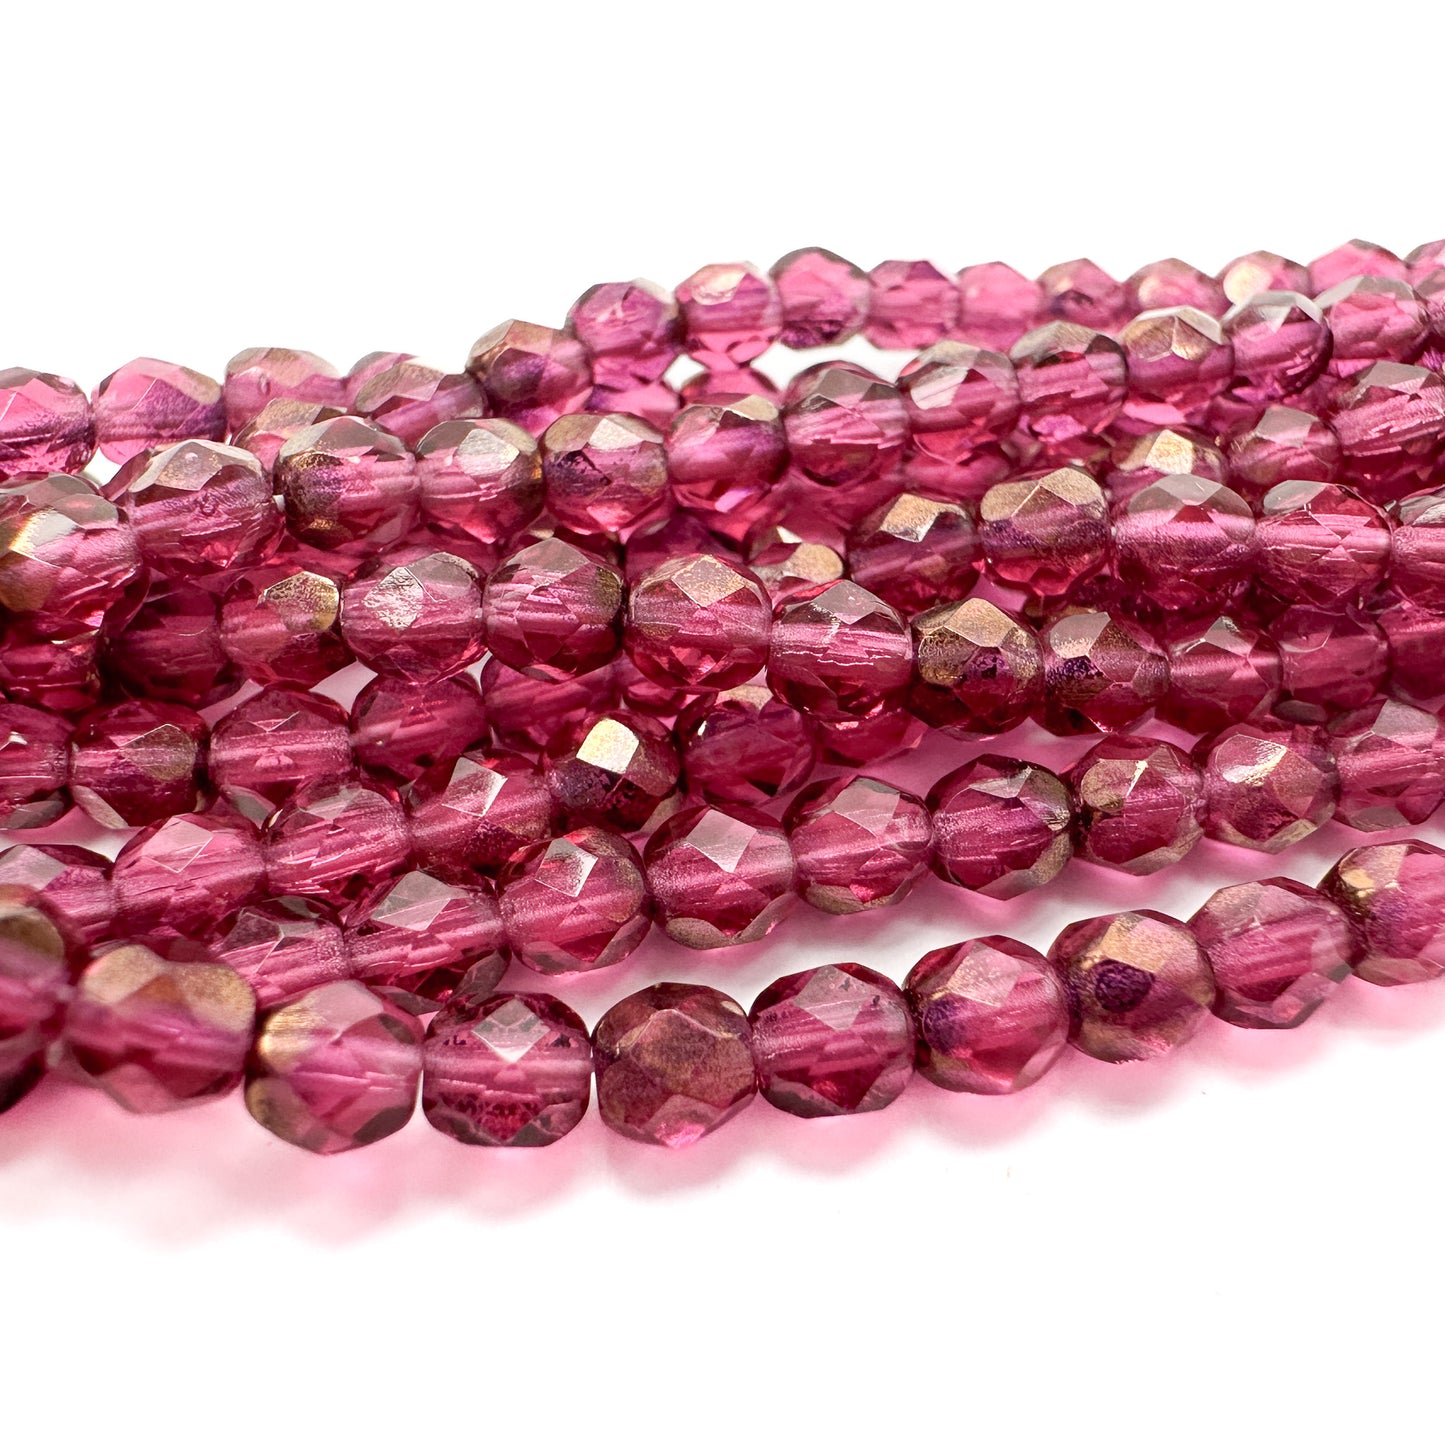 Fuchsia with Bronze Half Coat 4mm Faceted Glass Bead - 50 pcs.-The Bead Gallery Honolulu